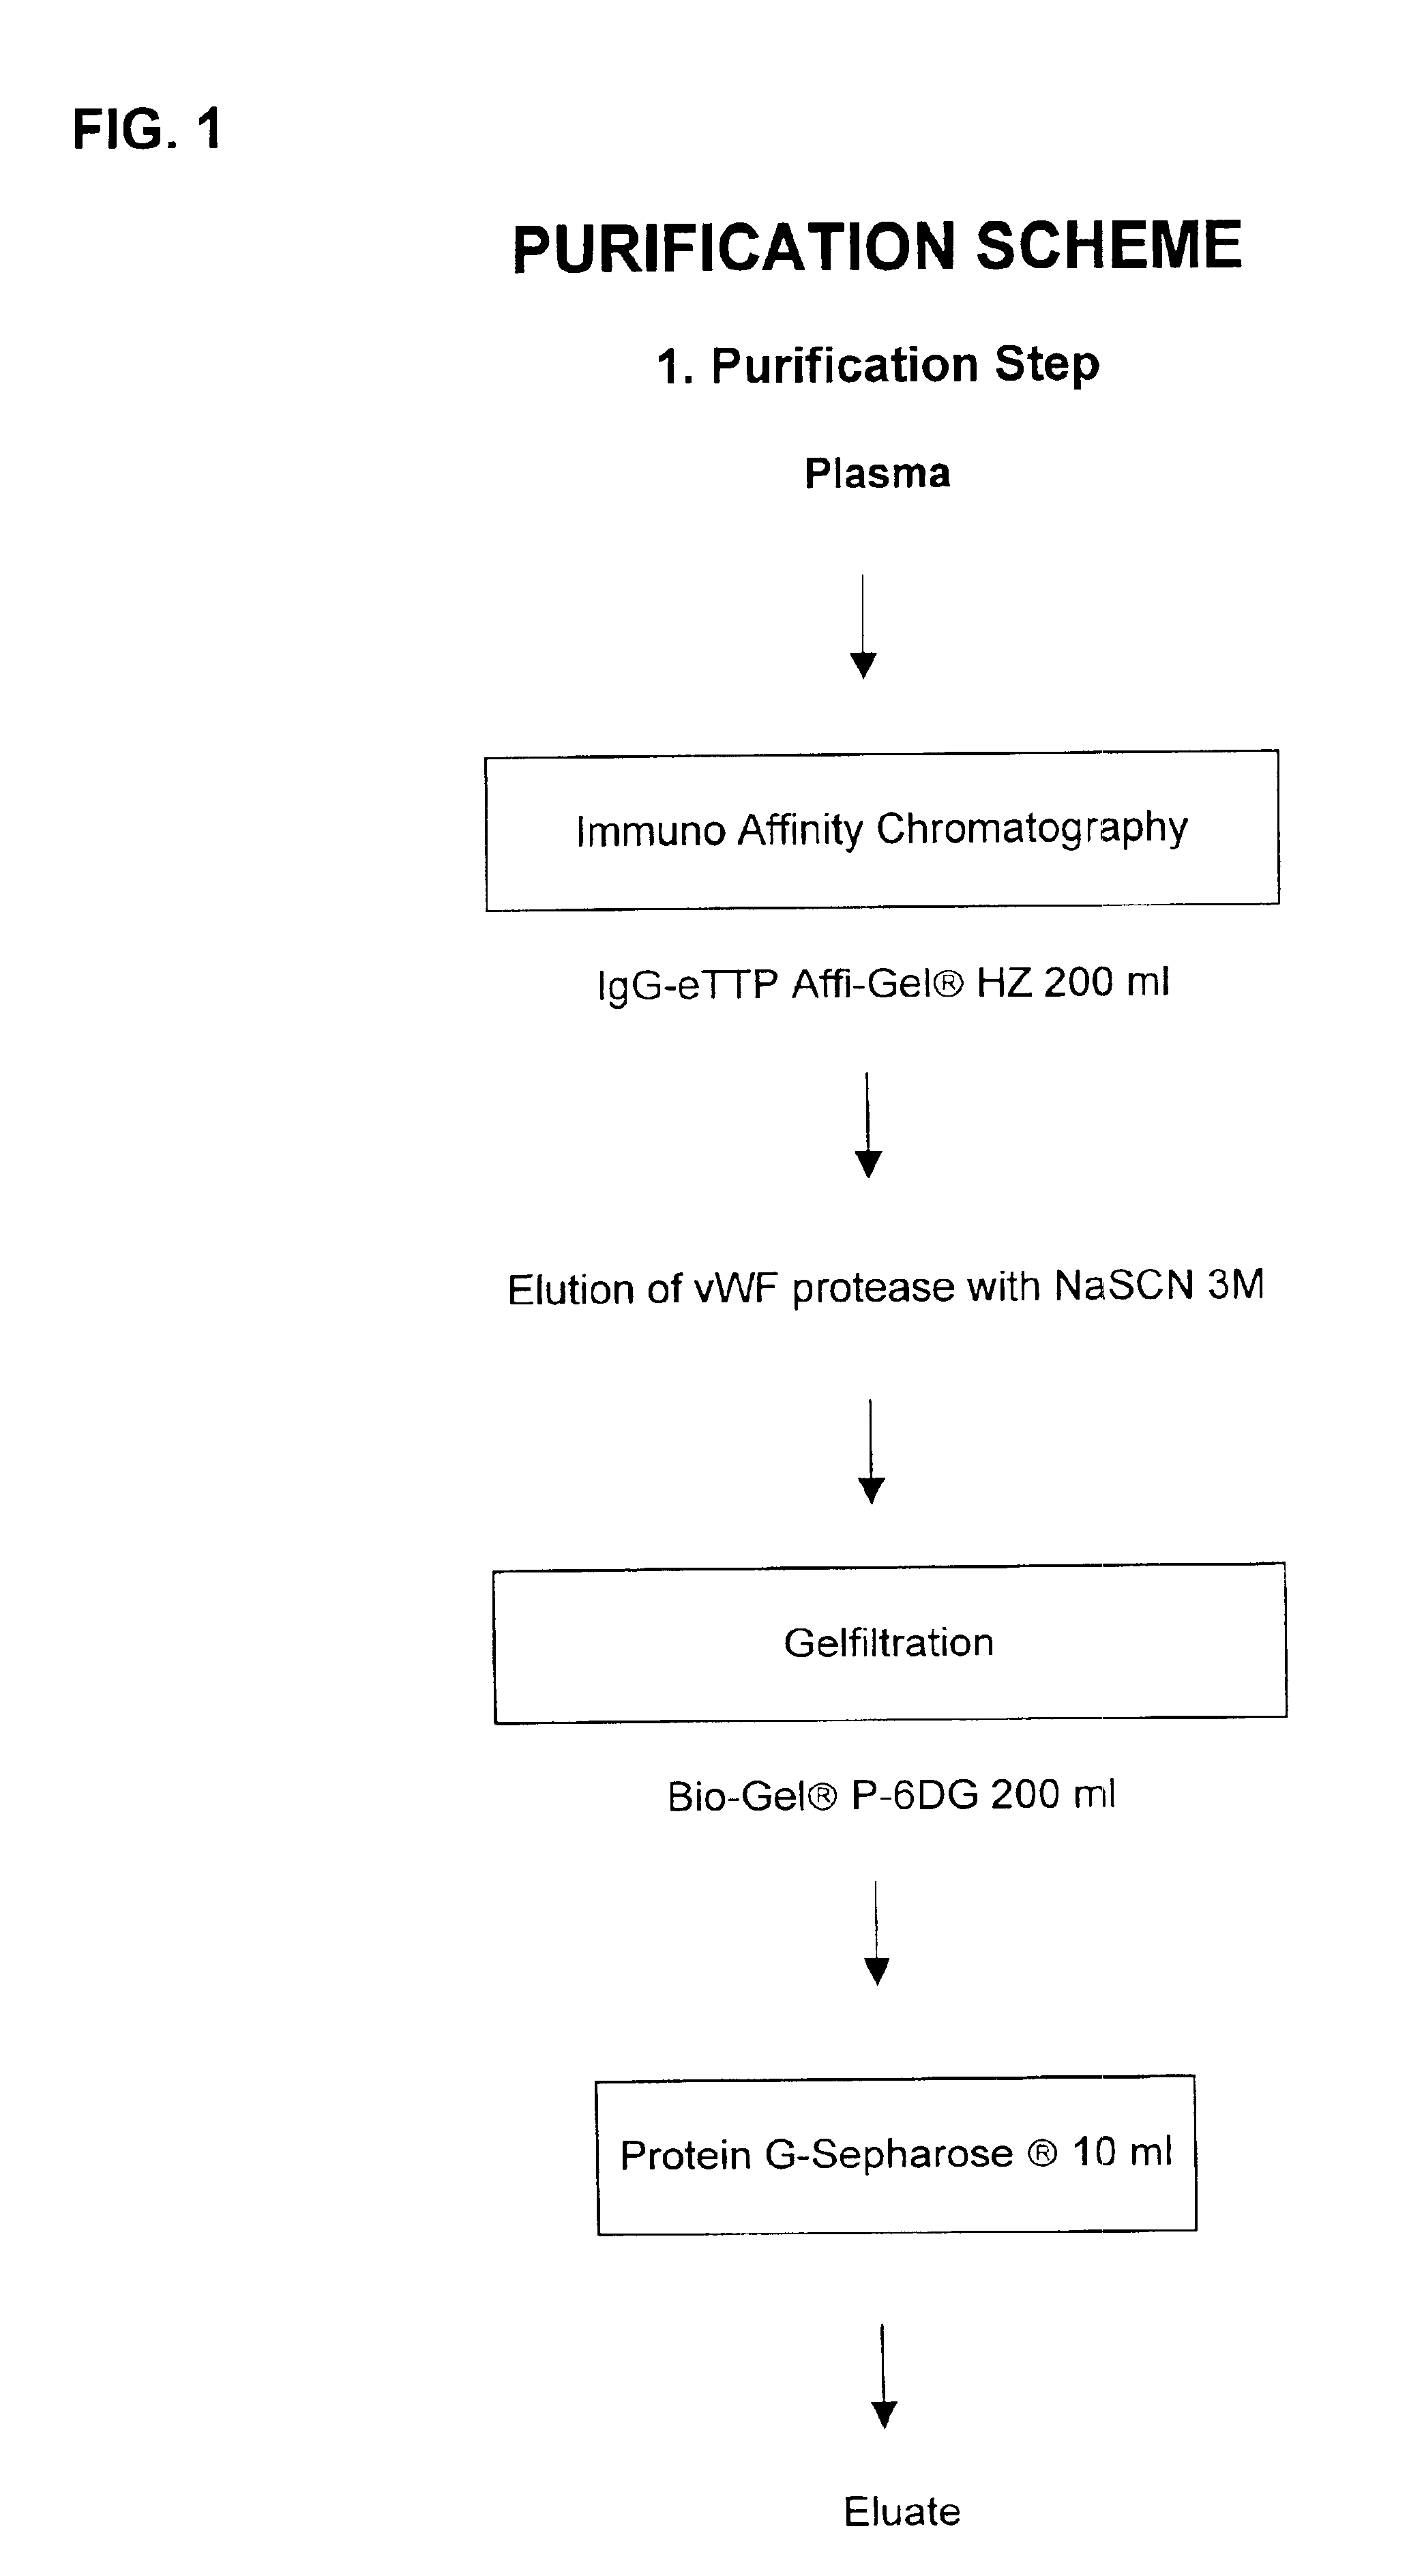 Composition exhibiting a von willebrand factor (vWF) protease activity comprising a polypeptide chain with the amino acid sequence AAGGILHLELLV